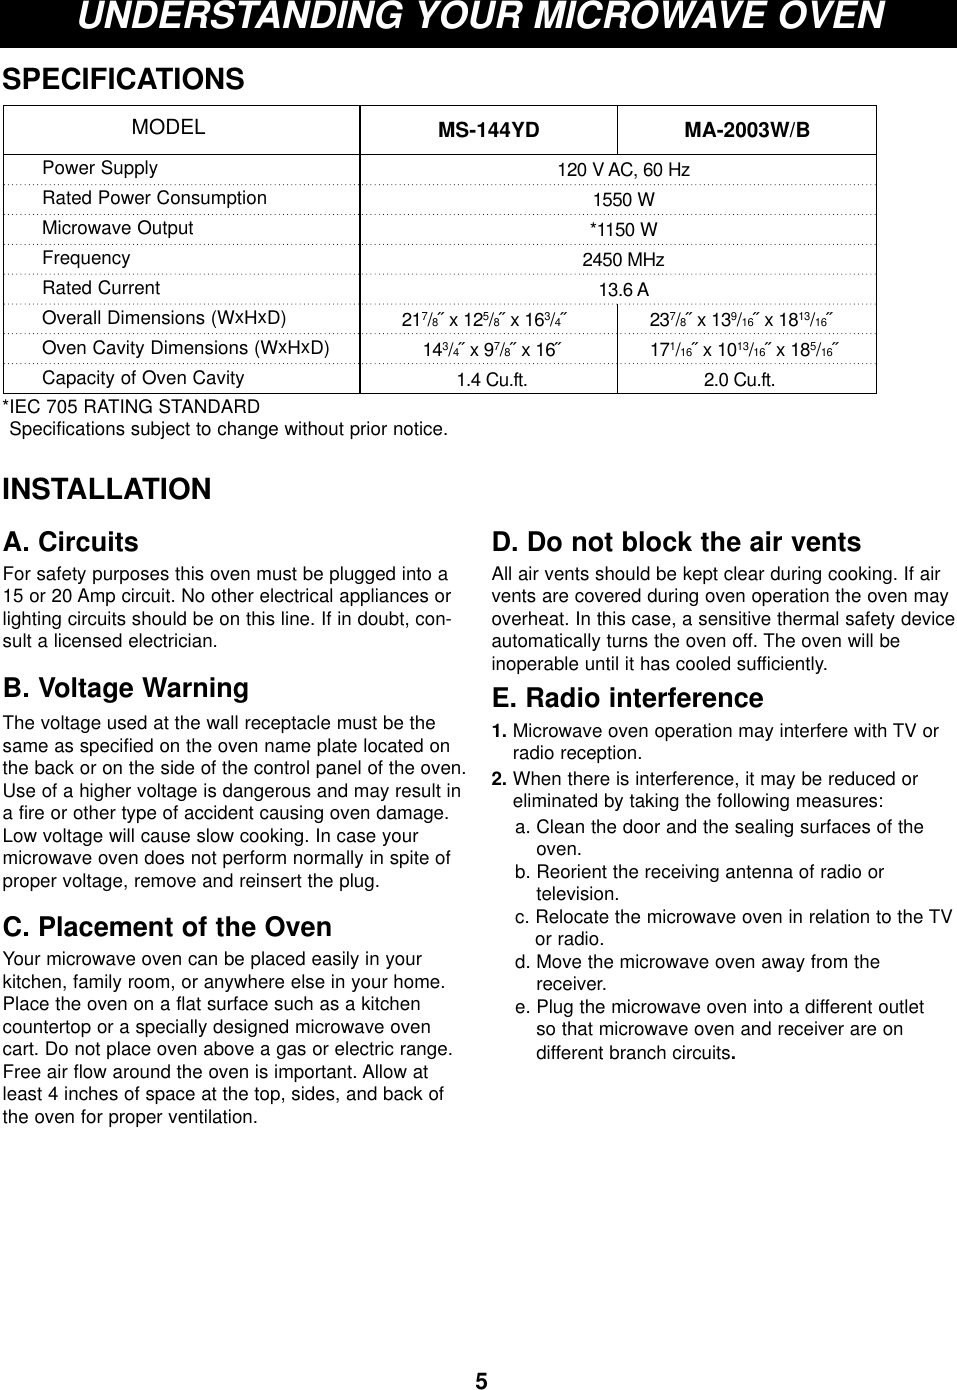 UNDERSTANDING YOUR MICROWAVE OVENSPECIFICATIONS*IEC 705 RATING STANDARD Specifications subject to change without prior notice.MS-144YD MA-2003W/BMODELPower SupplyRated Power ConsumptionMicrowave OutputFrequencyRated CurrentOverall Dimensions (WxHxD)Oven Cavity Dimensions (WxHxD)Capacity of Oven Cavity120 V AC, 60 Hz1550 W*1150 W2450 MHz13.6 A217/8˝ x 125/8˝ x 163/4˝237/8˝ x 139/16˝ x 1813/16˝143/4˝ x 97/8˝ x 16˝ 171/16˝ x 1013/16˝ x 185/16˝ 1.4 Cu.ft.                                  2.0 Cu.ft.INSTALLATION5A. CircuitsFor safety purposes this oven must be plugged into a15 or 20 Amp circuit. No other electrical appliances orlighting circuits should be on this line. If in doubt, con-sult a licensed electrician.B. Voltage Warning The voltage used at the wall receptacle must be thesame as specified on the oven name plate located onthe back or on the side of the control panel of the oven.Use of a higher voltage is dangerous and may result ina fire or other type of accident causing oven damage.Low voltage will cause slow cooking. In case yourmicrowave oven does not perform normally in spite ofproper voltage, remove and reinsert the plug.C. Placement of the OvenYour microwave oven can be placed easily in yourkitchen, family room, or anywhere else in your home.Place the oven on a flat surface such as a kitchencountertop or a specially designed microwave ovencart. Do not place oven above a gas or electric range.Free air flow around the oven is important. Allow atleast 4 inches of space at the top, sides, and back ofthe oven for proper ventilation. D. Do not block the air ventsAll air vents should be kept clear during cooking. If airvents are covered during oven operation the oven mayoverheat. In this case, a sensitive thermal safety deviceautomatically turns the oven off. The oven will be inoperable until it has cooled sufficiently.E. Radio interference1. Microwave oven operation may interfere with TV orradio reception.2. When there is interference, it may be reduced oreliminated by taking the following measures:a. Clean the door and the sealing surfaces of theoven.b. Reorient the receiving antenna of radio or television.c. Relocate the microwave oven in relation to the TVor radio.d. Move the microwave oven away from the receiver.e. Plug the microwave oven into a different outlet so that microwave oven and receiver are on different branch circuits.